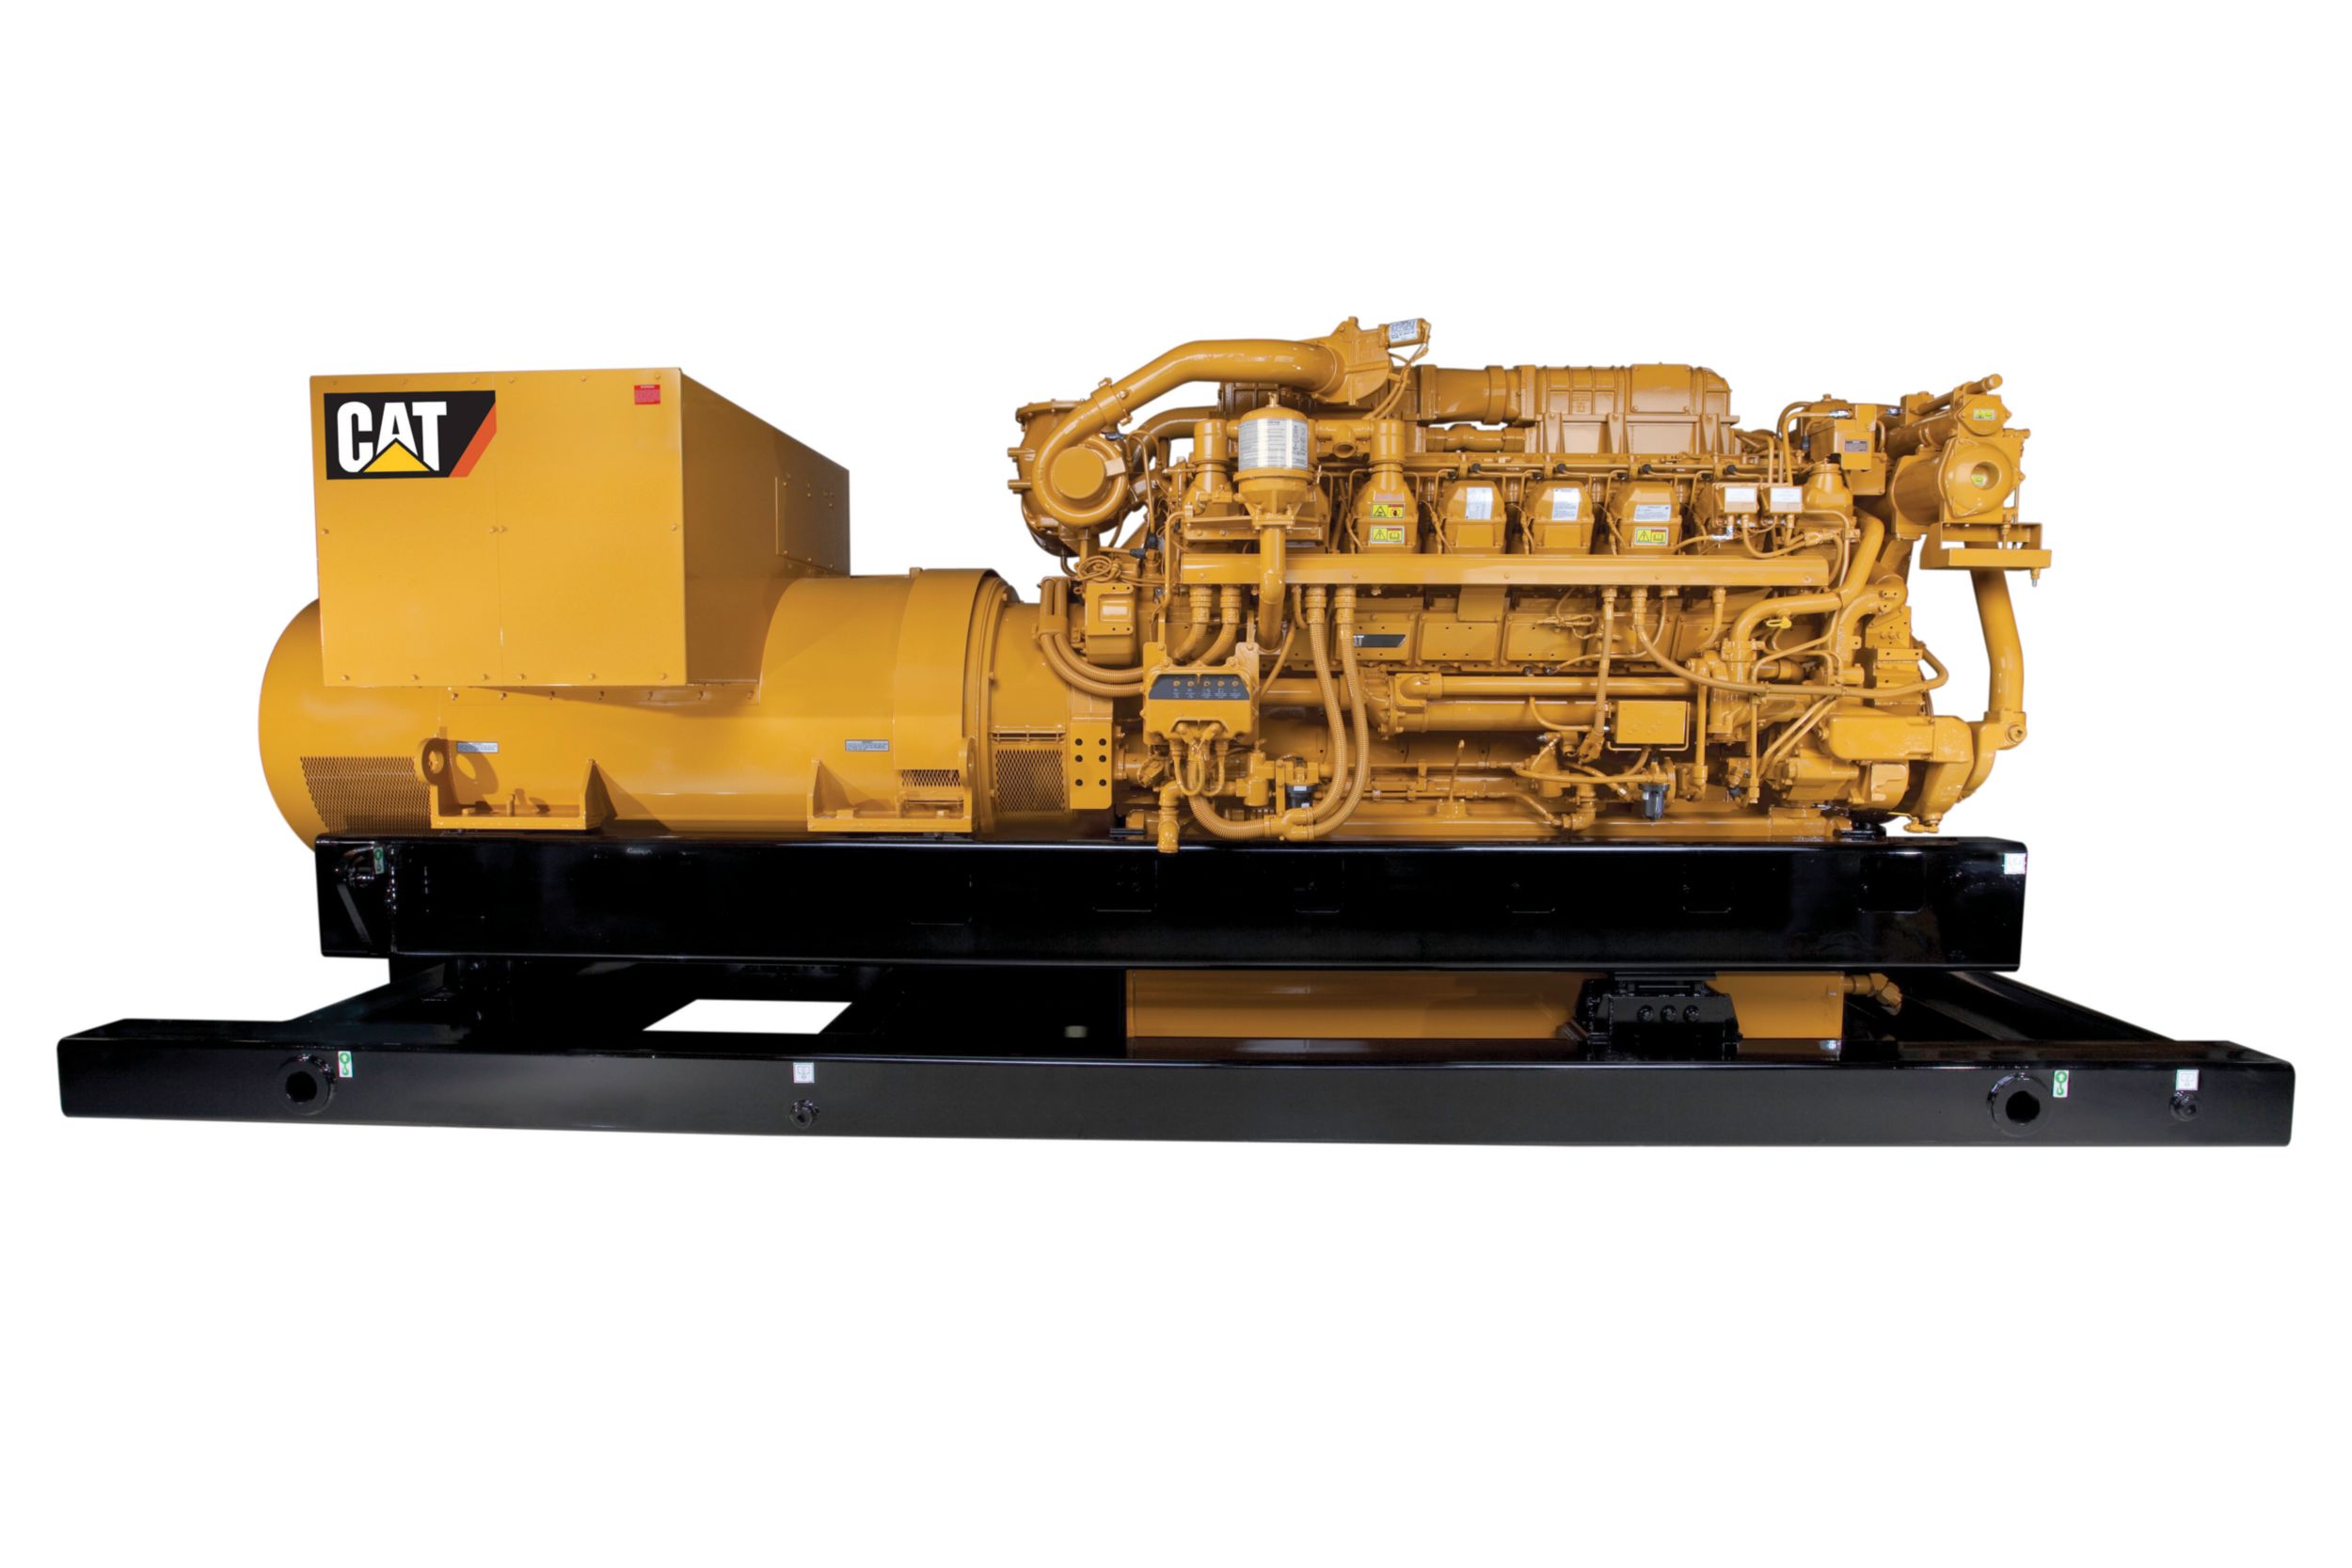 Offshore Drilling and Production Generator Sets